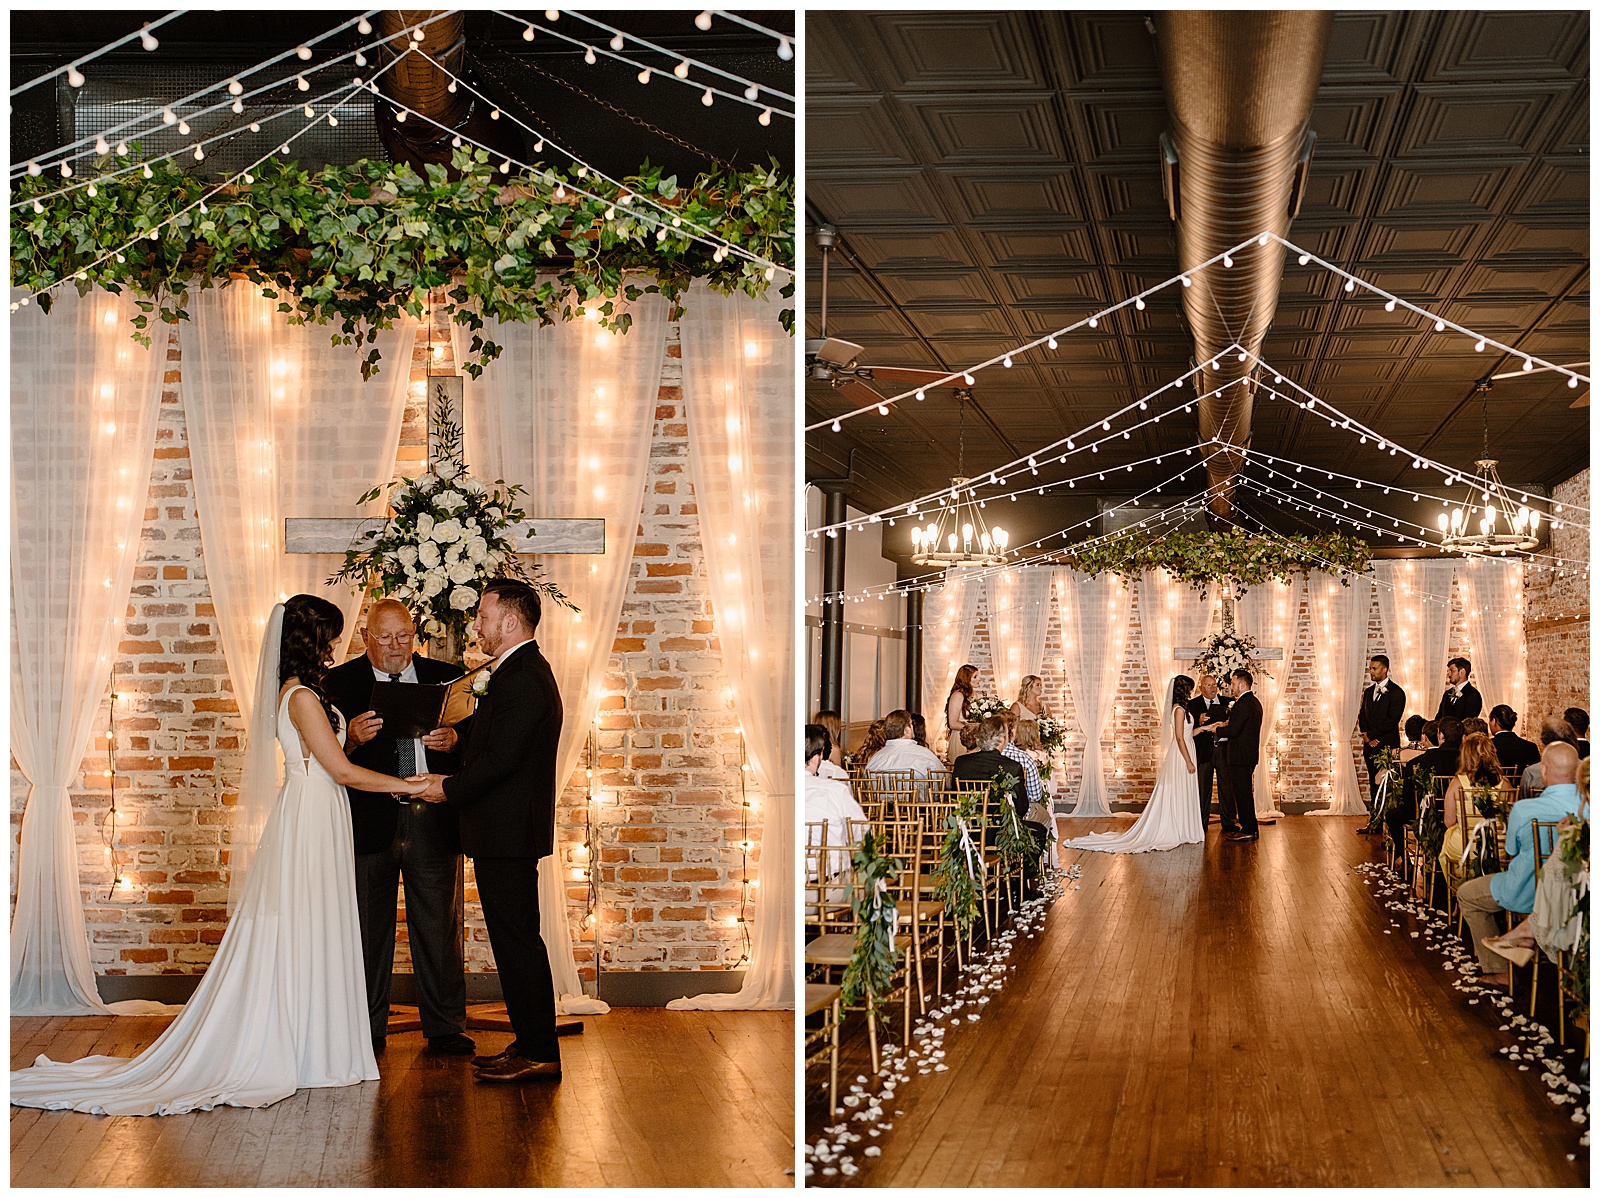 Bride and groom getting married in front of rustic brick wall with string lights at their modern wedding in Winston-Salem